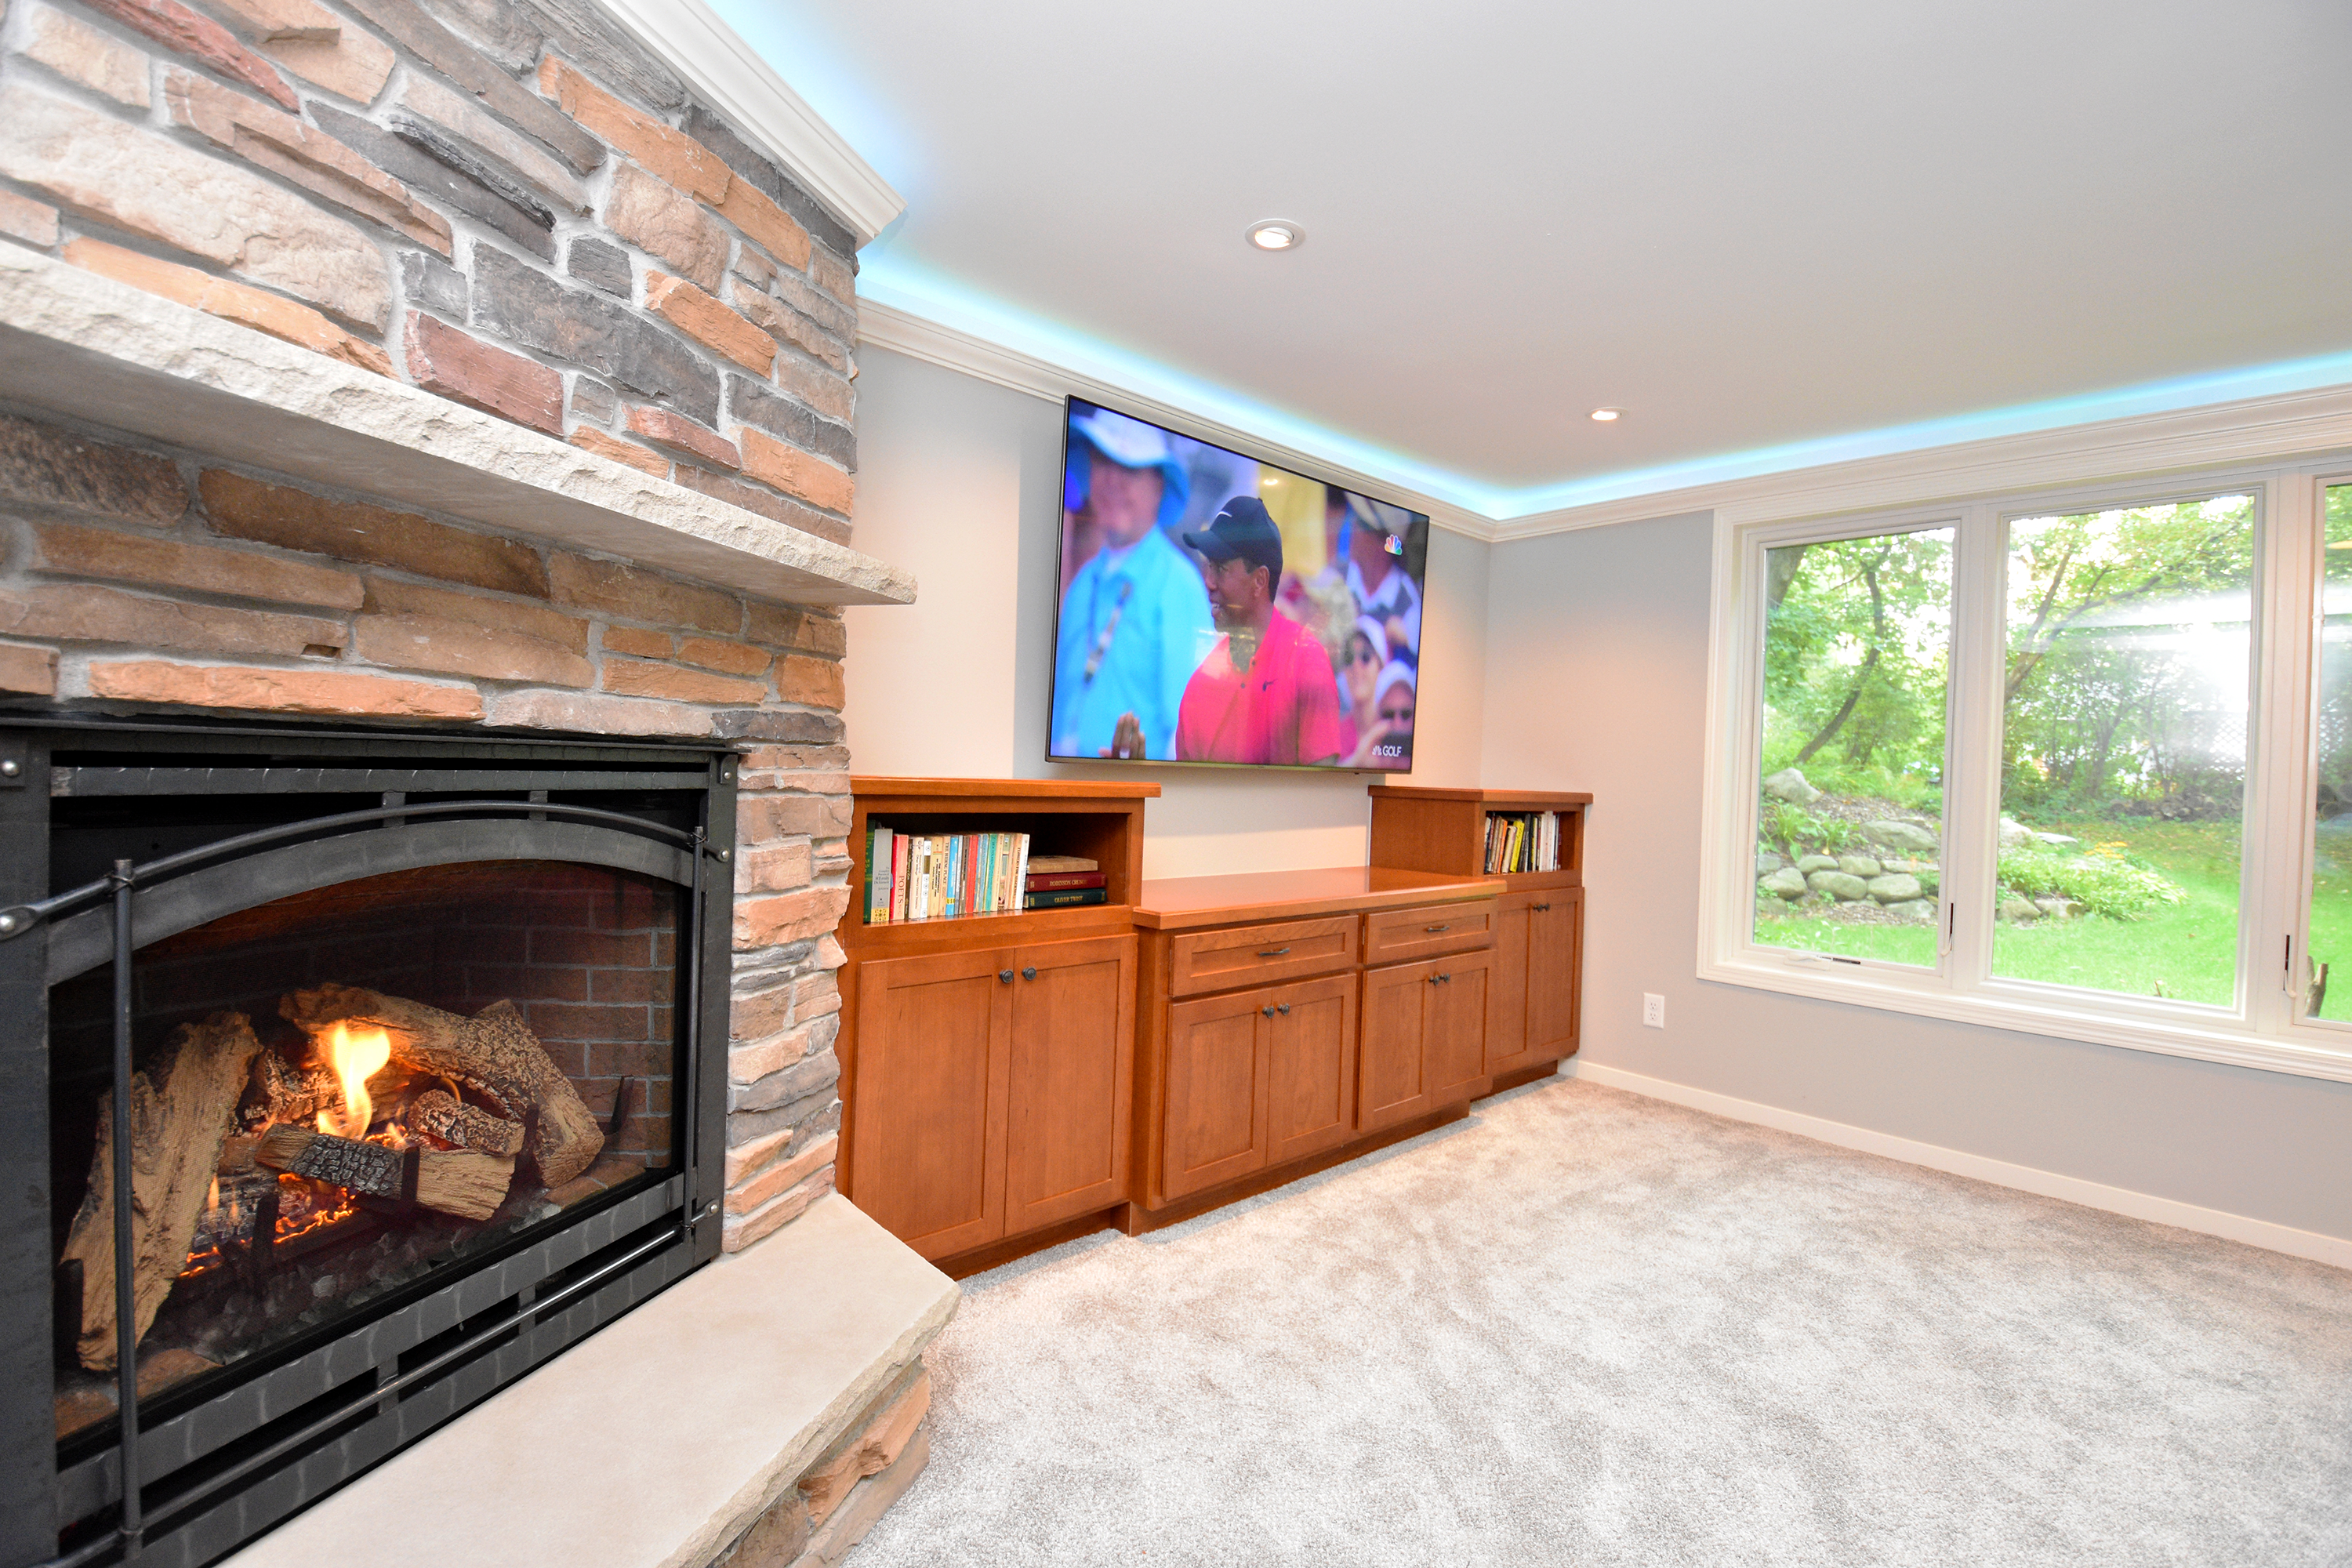 Basement remodel - view of fireplace and TV